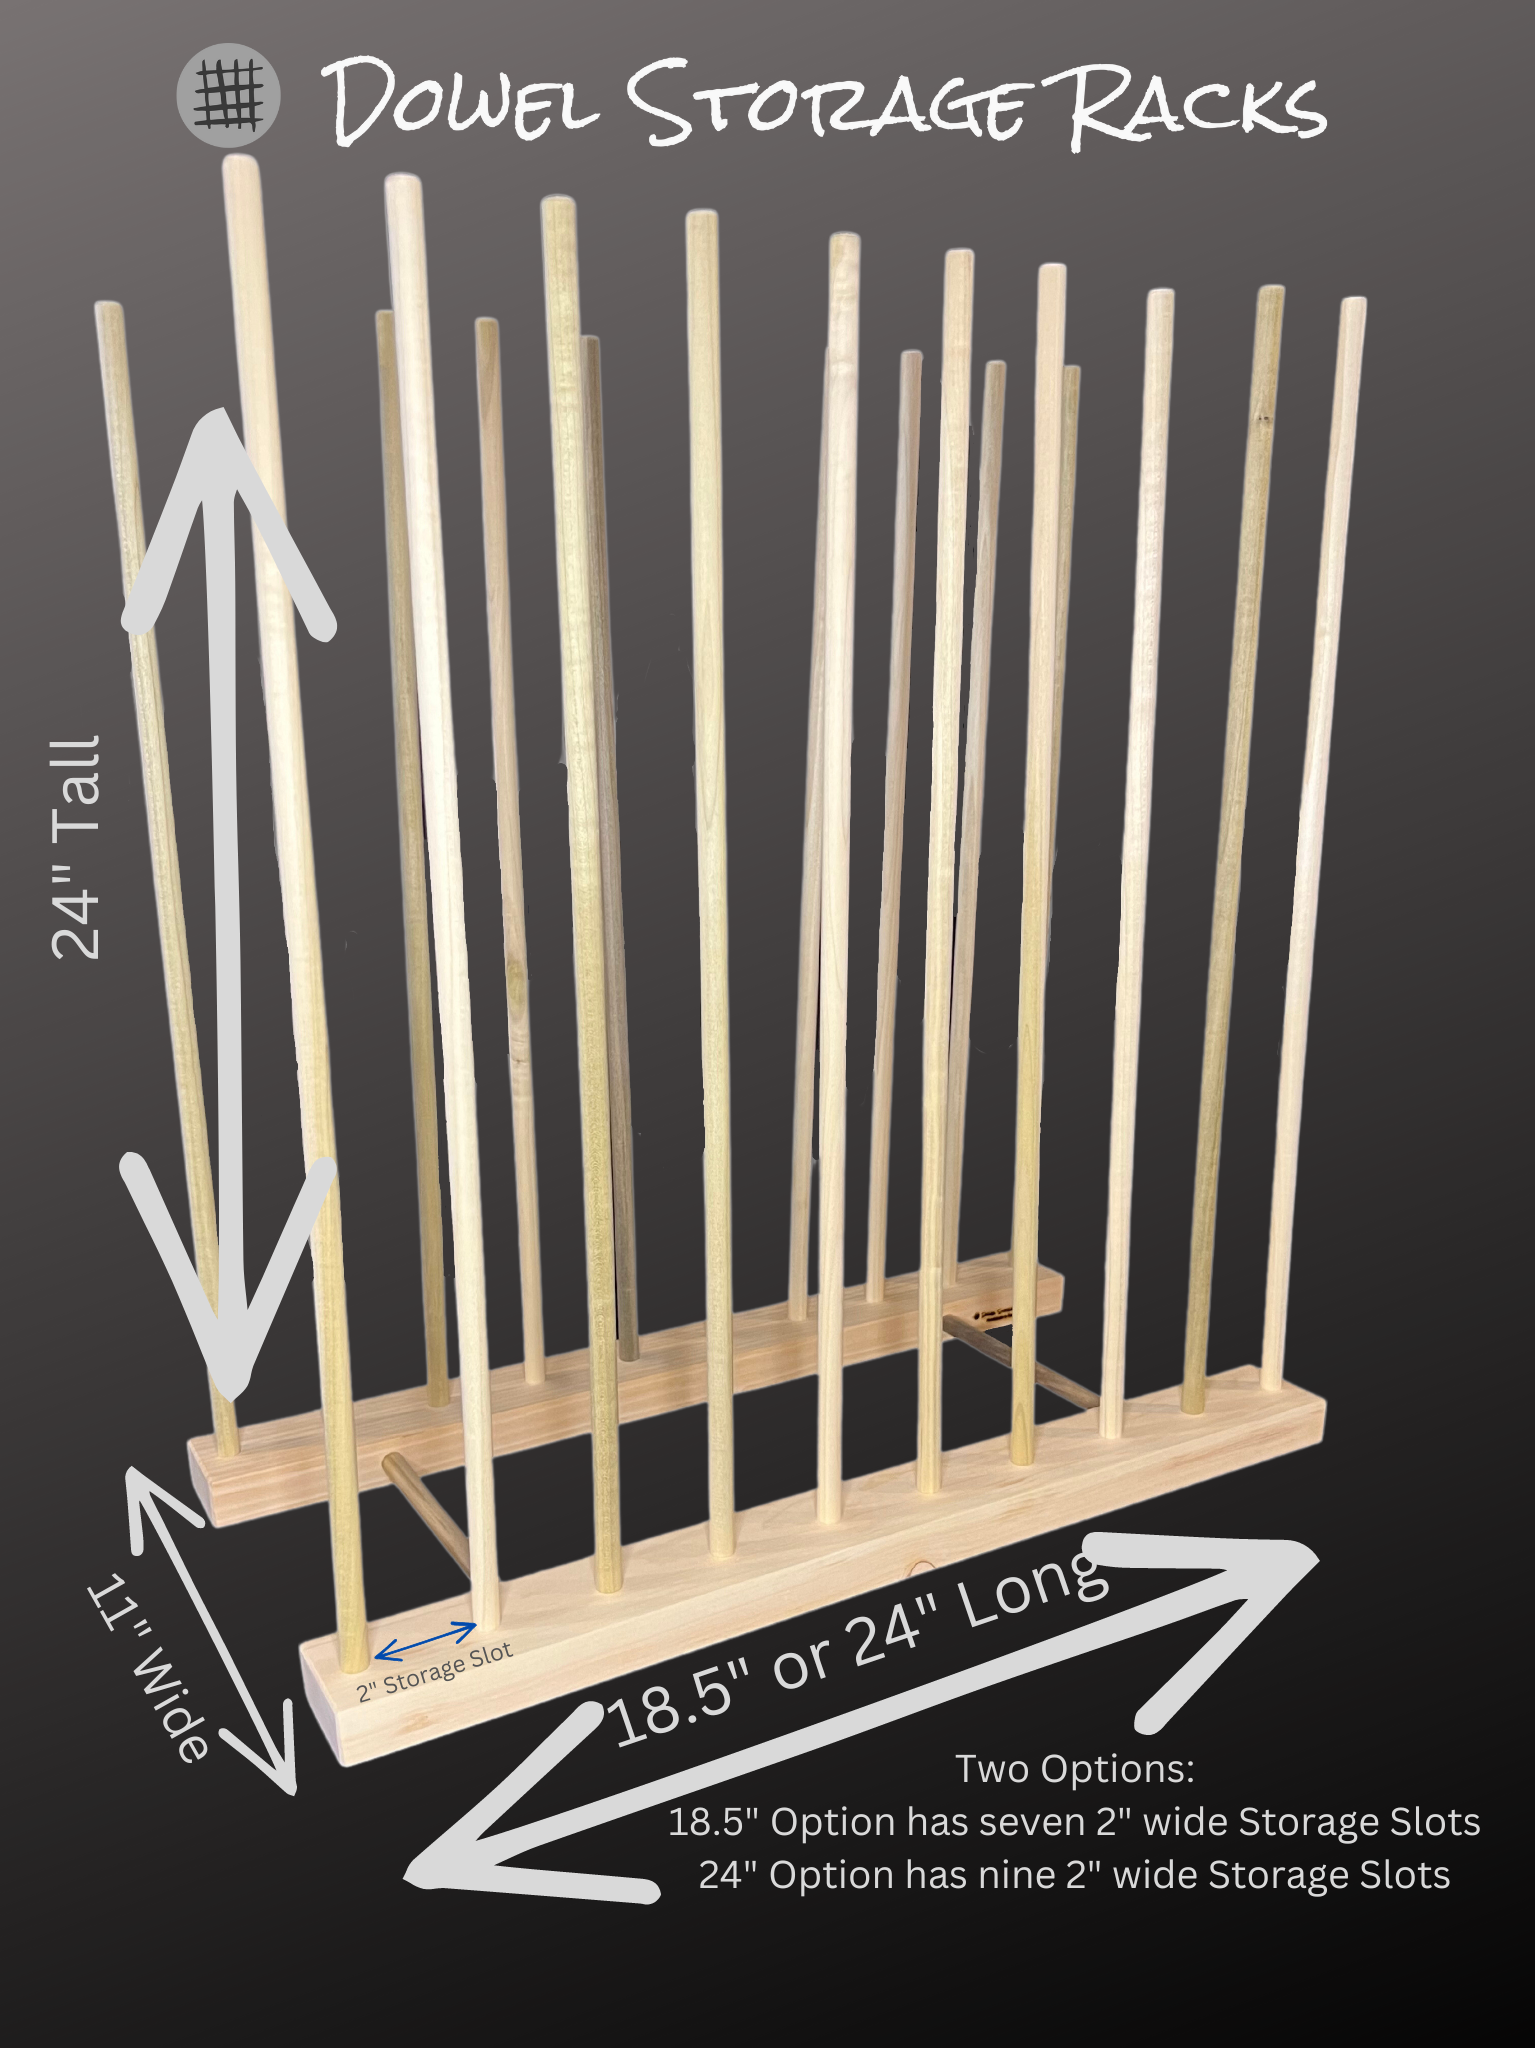 Art Storage Rack with 24” Tall Dowels - Optional Locking Caster Wheels